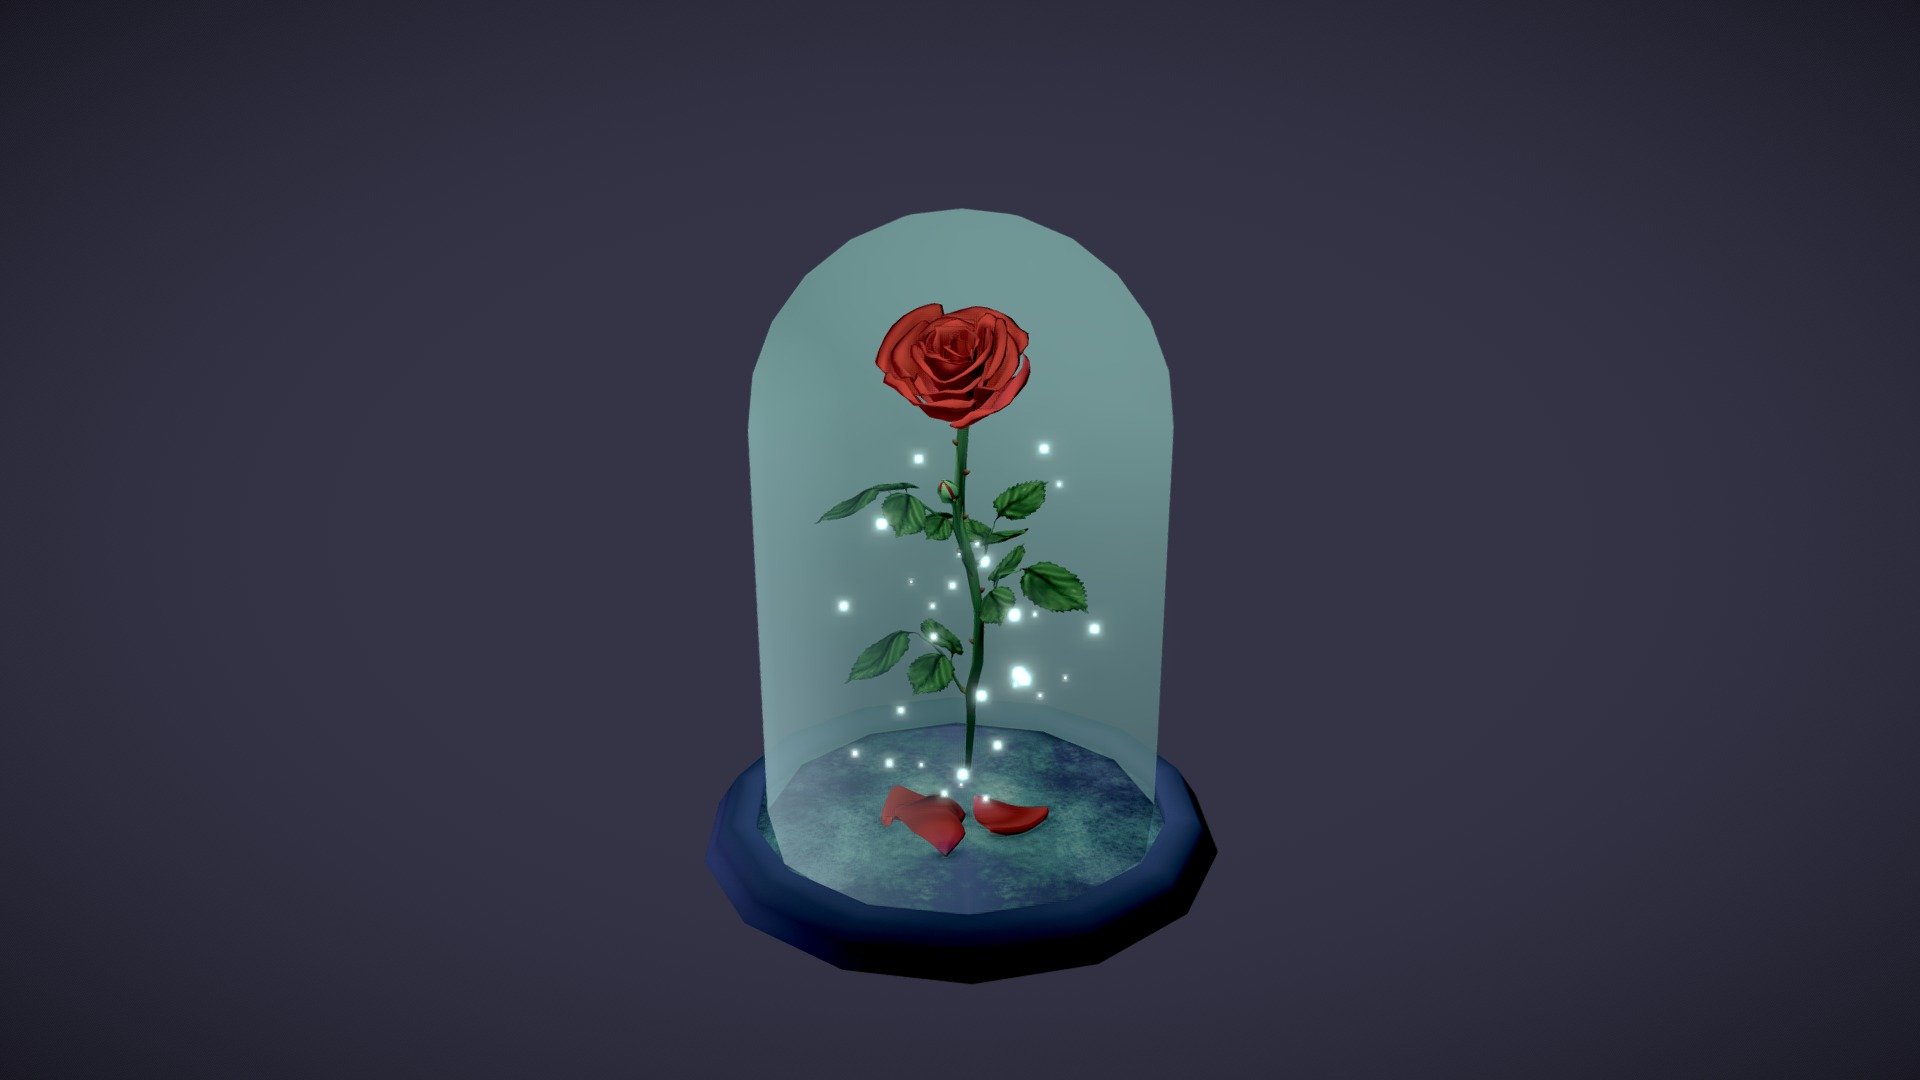 3D hand - painted model of a rose using both zbrush and 3dmax. Inspired by the Beauty and the Beast one 3d model